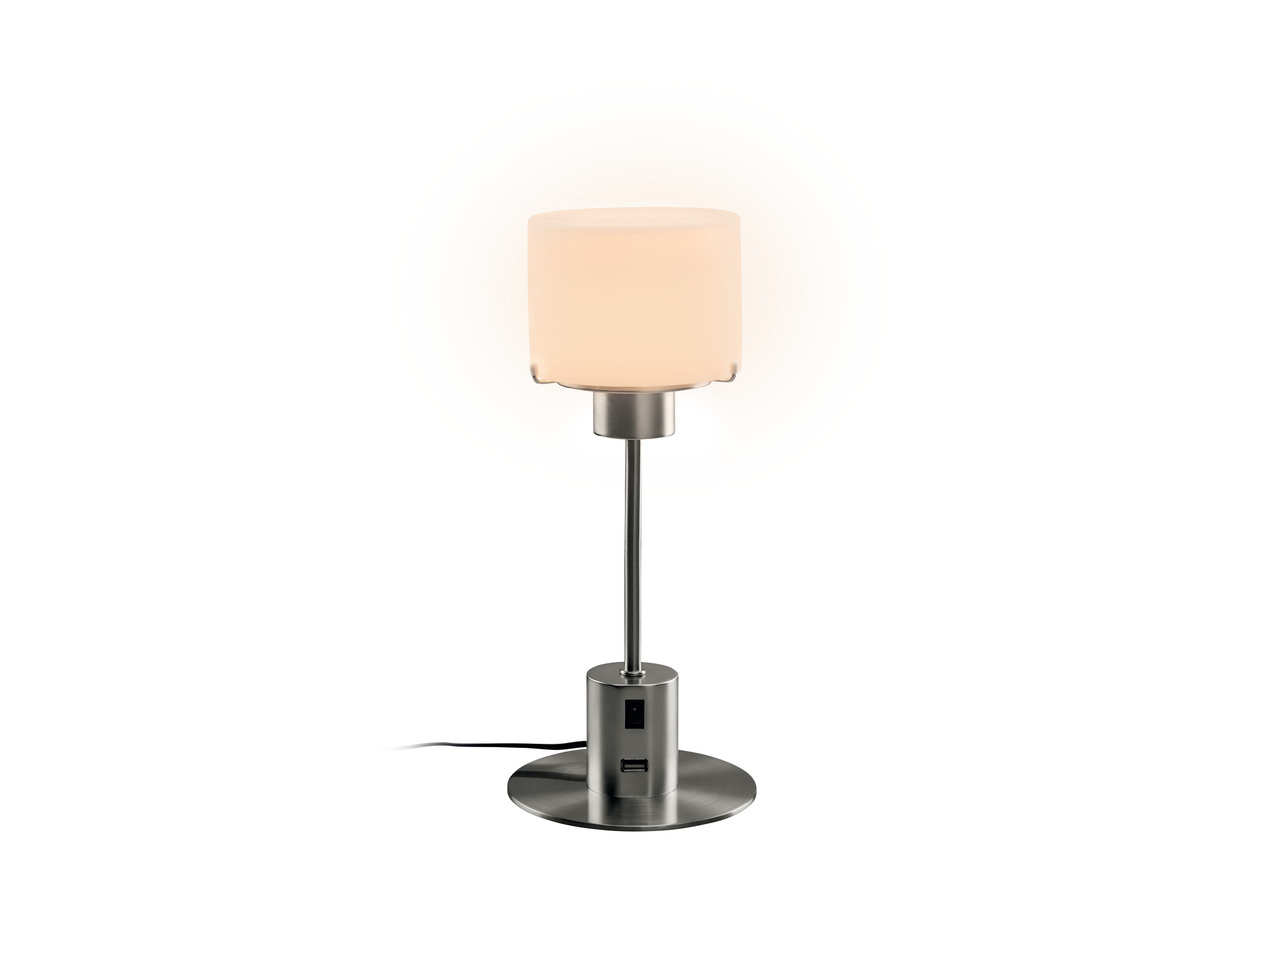 Delegeren het is mooi JEP LIVARNO LUX LED Table Lamp with USB - Lidl — Ireland - Specials archive